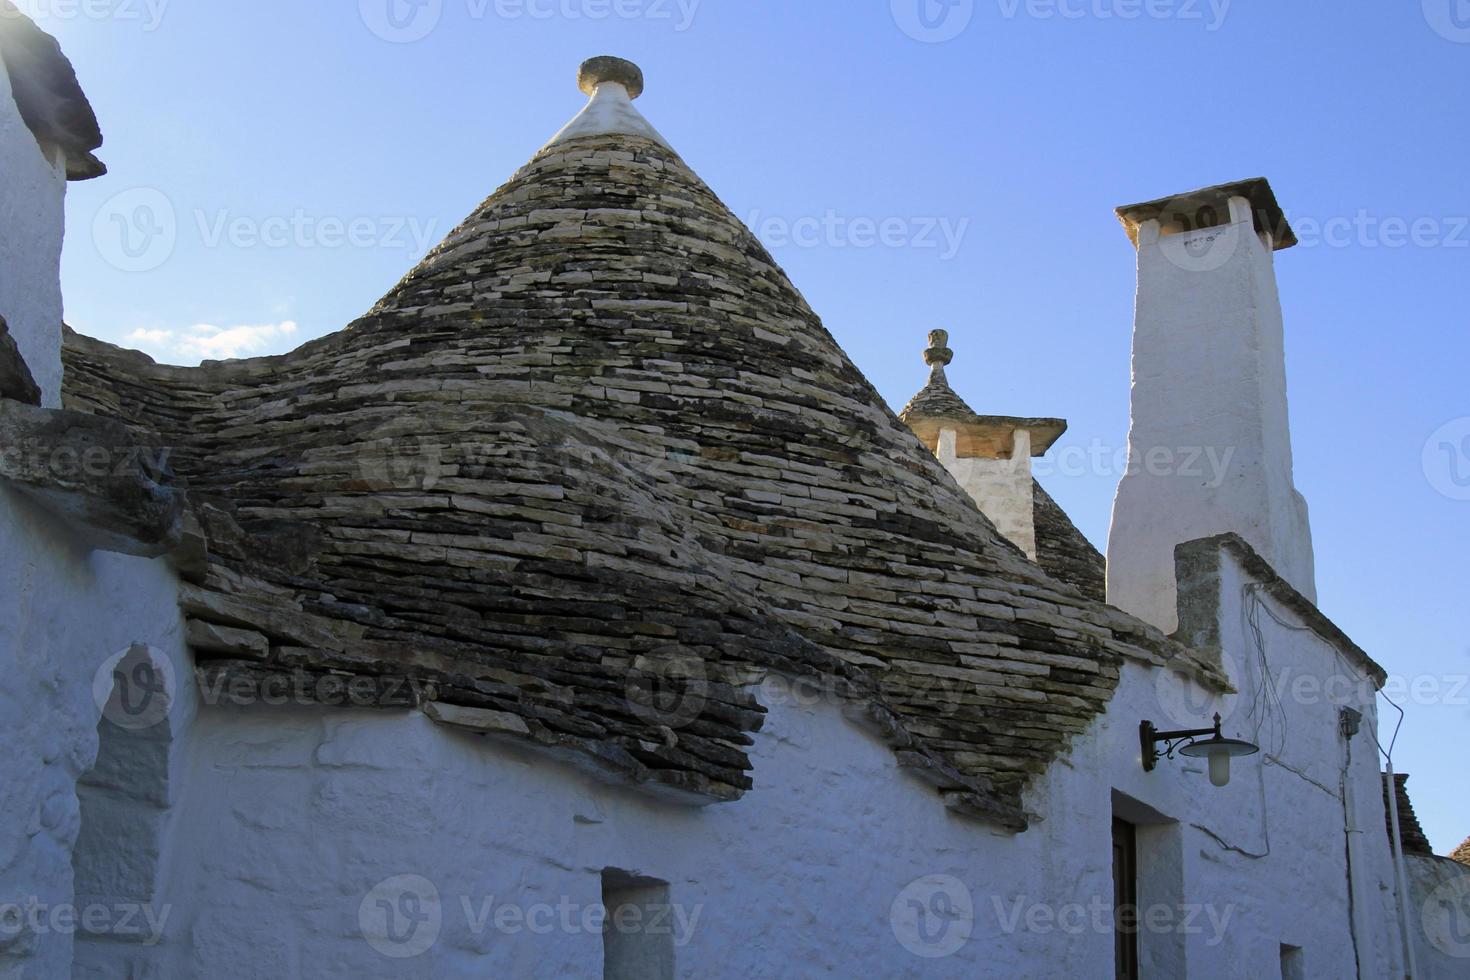 The characteristic Trulli in Alberobello, Italy, against a blue sky photo